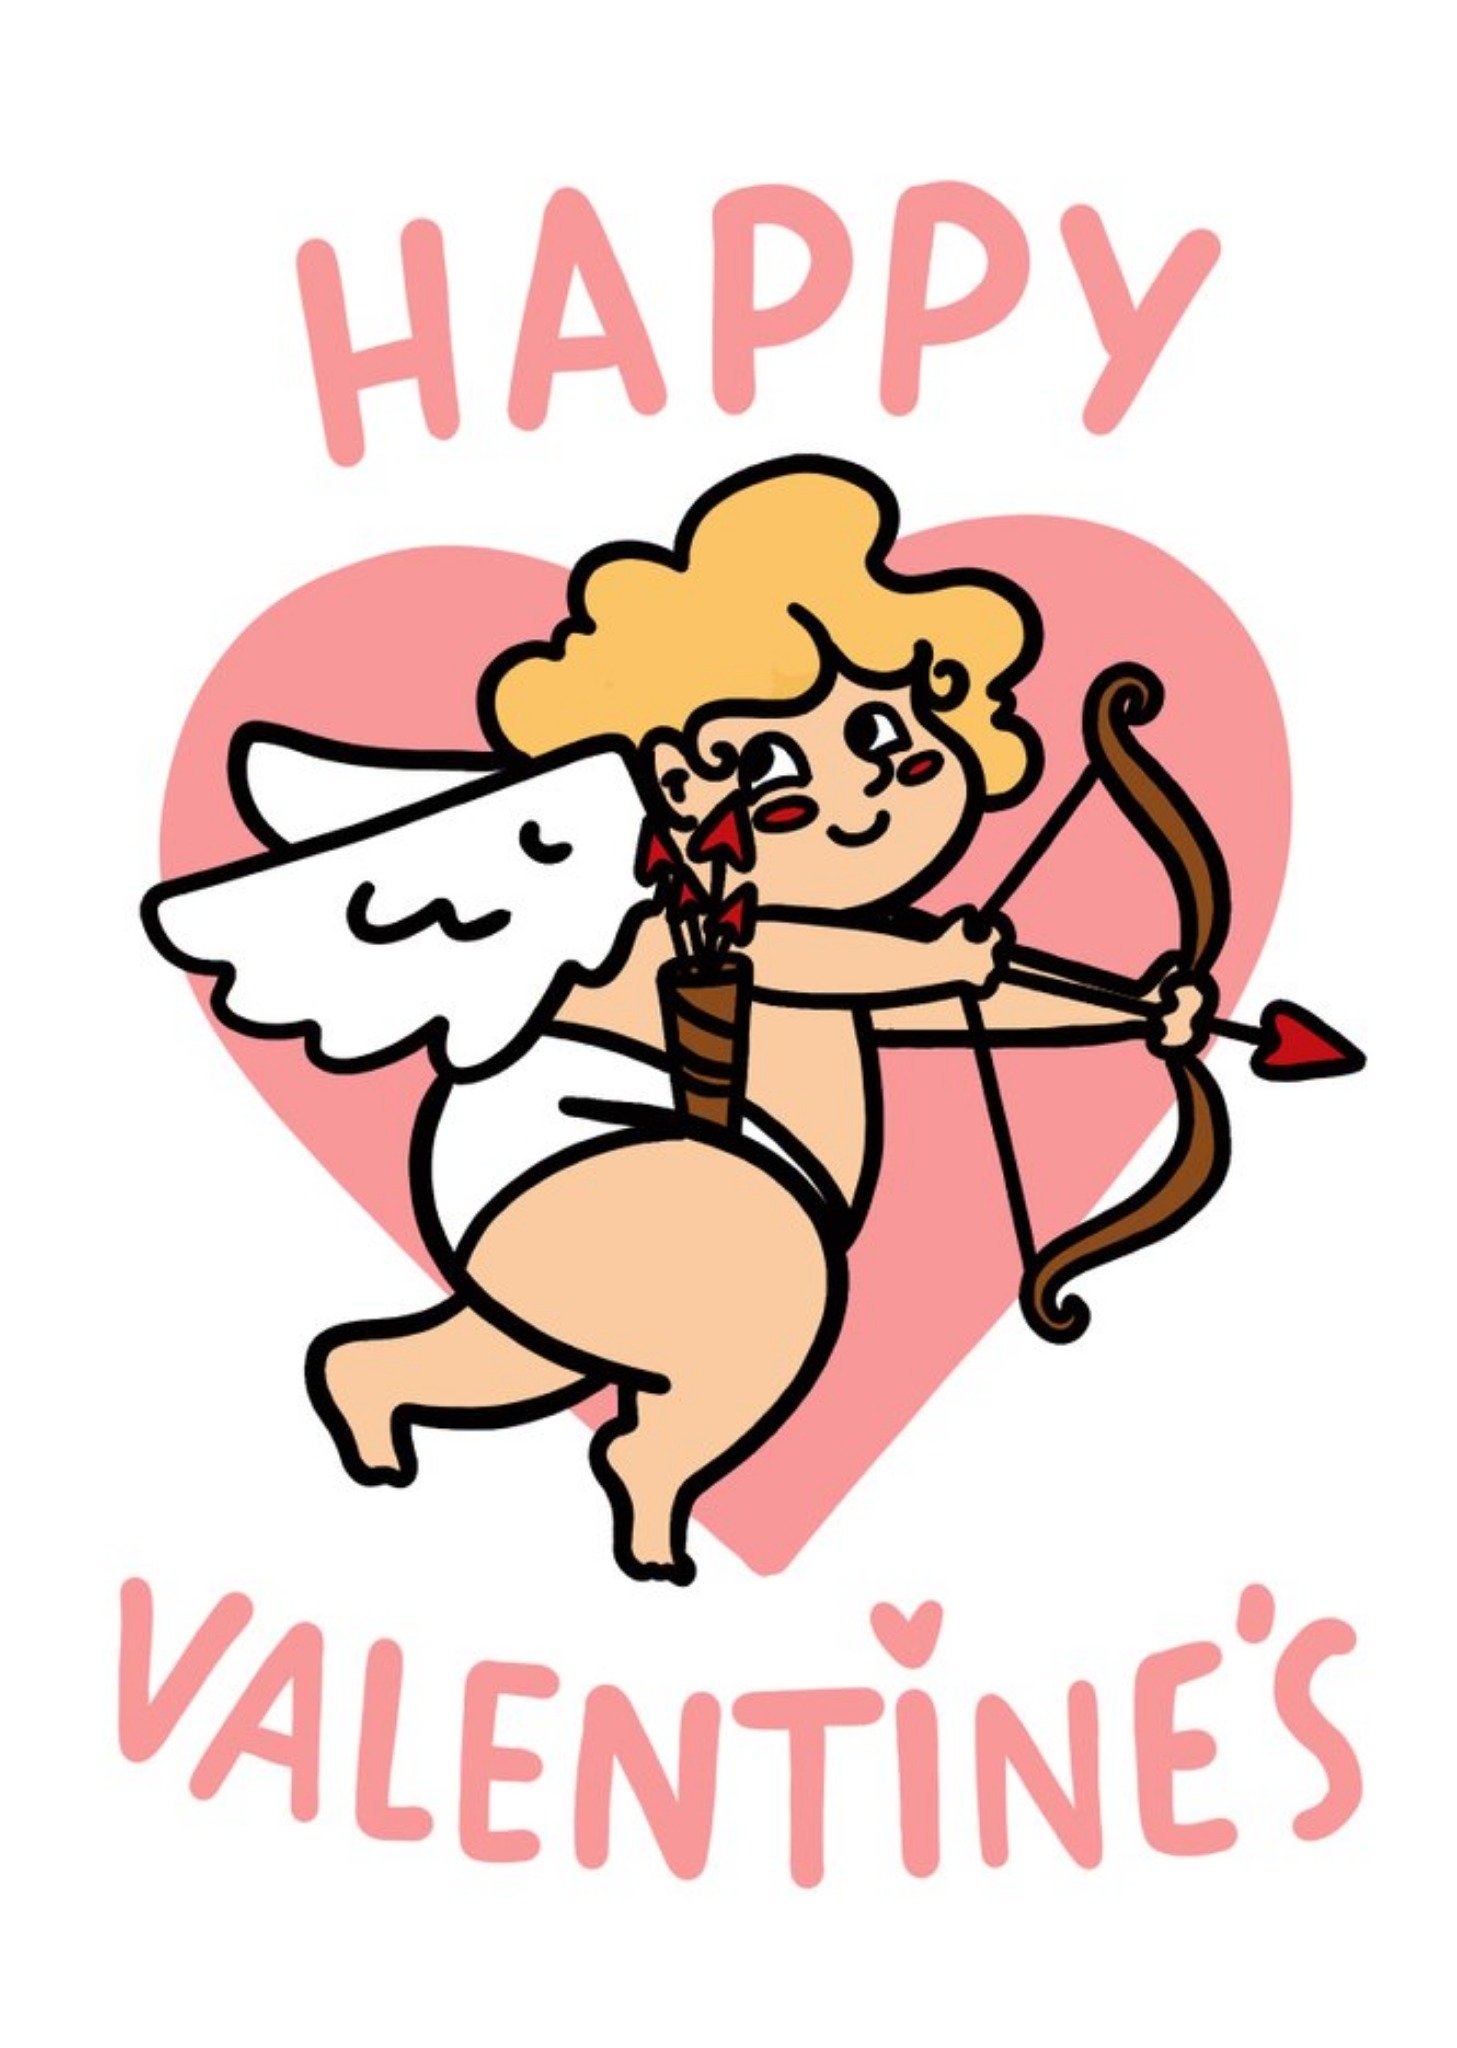 Moonpig Cute Illustrated Cupid With Bow And Arrow Valentine's Card Ecard